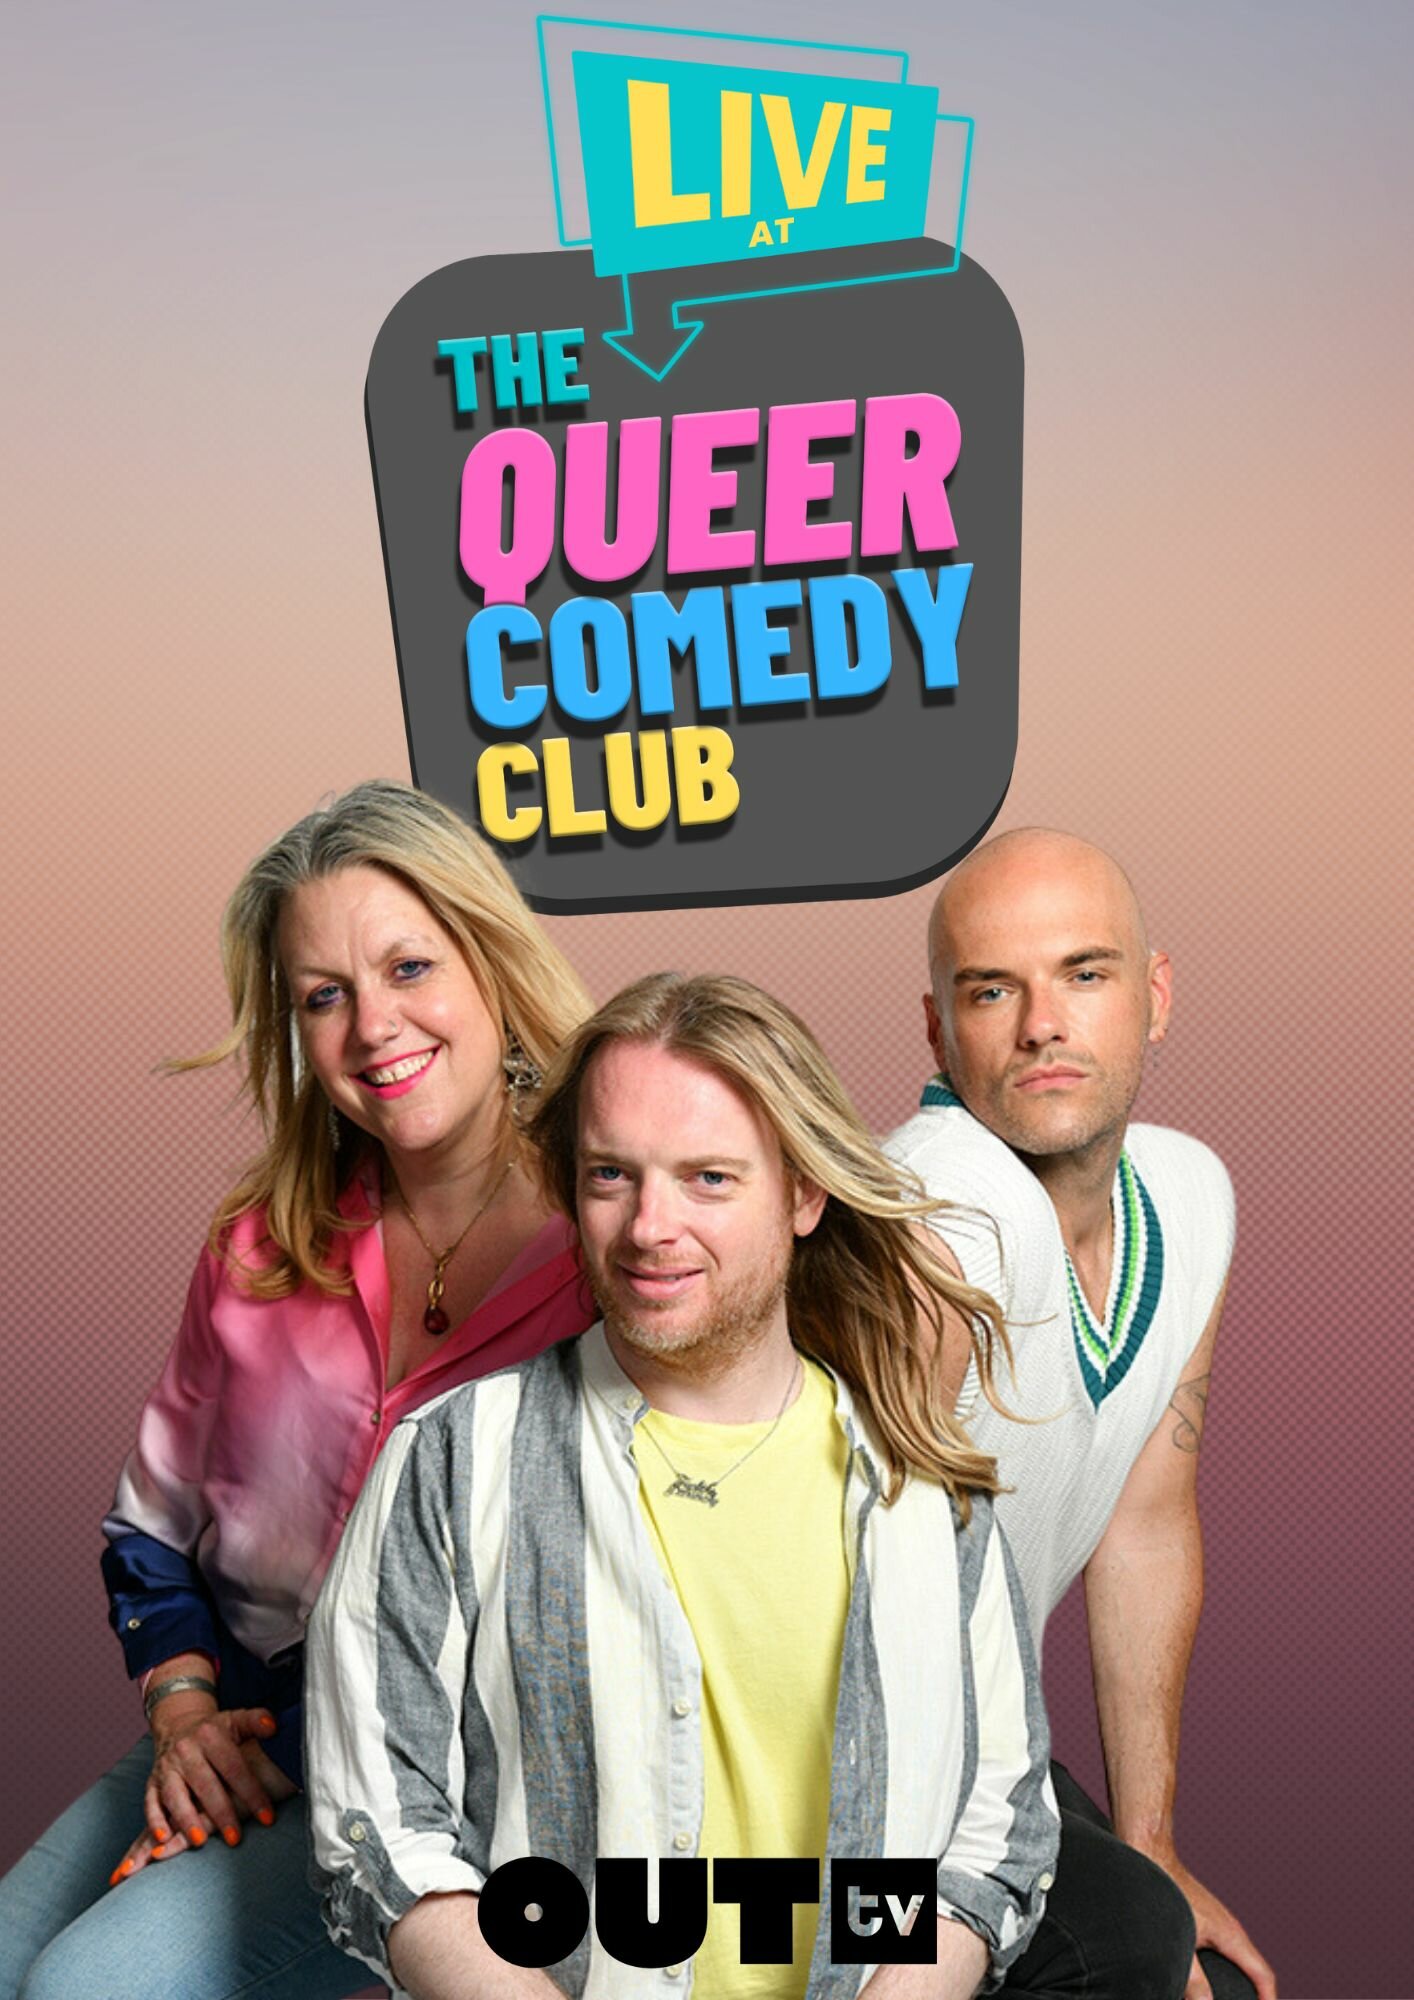 Live at the Queer Comedy Club ne zaman